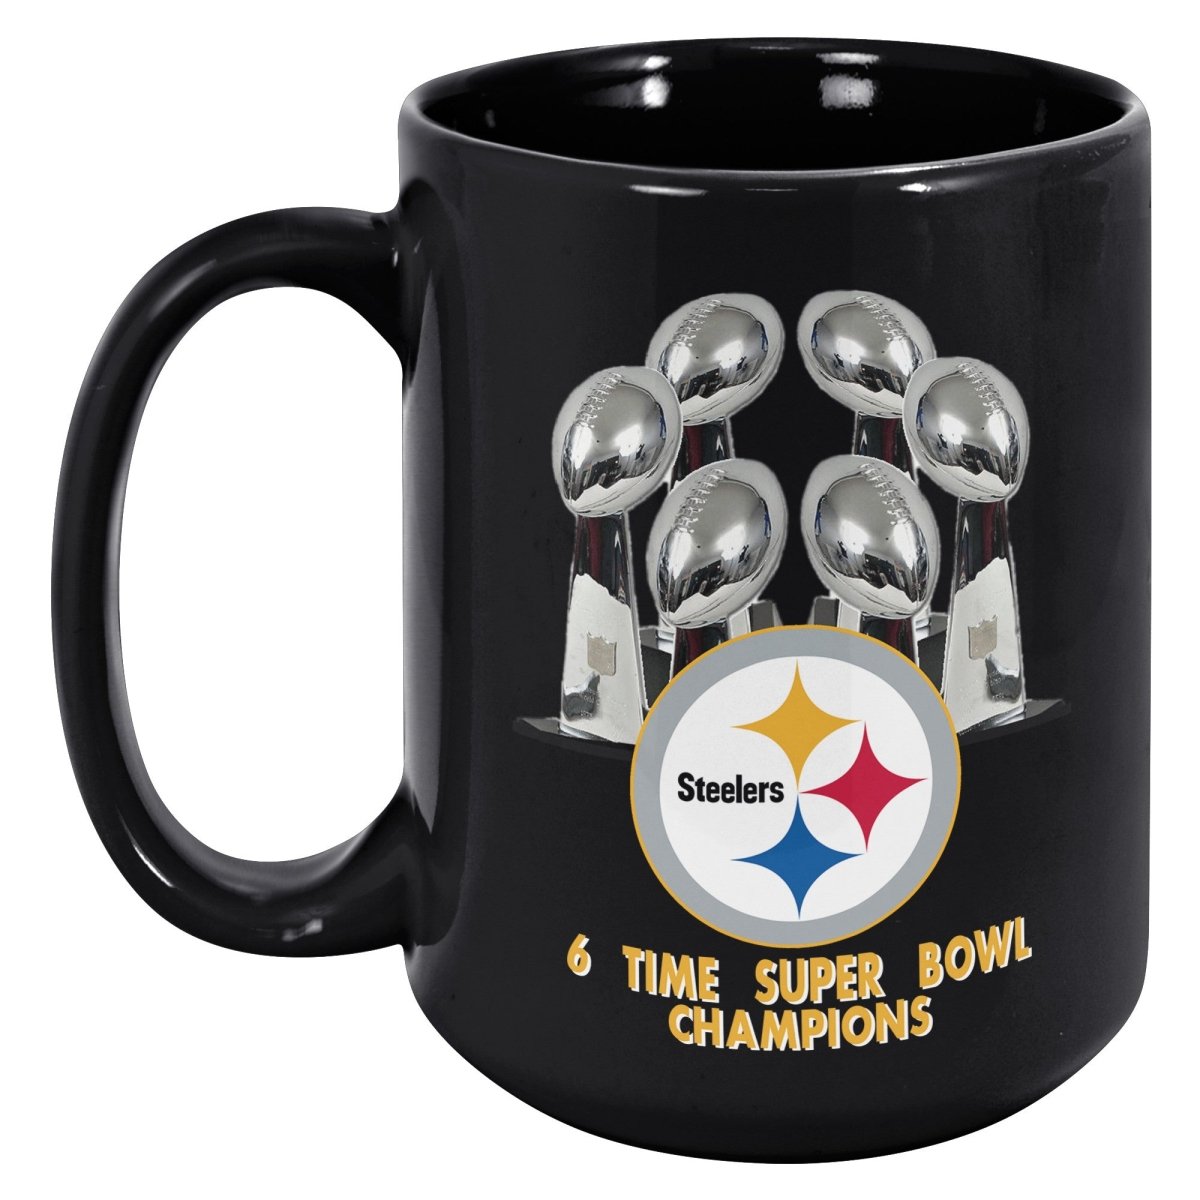 Pitsburgh 6 Time SB ChampionsCustomly Gifts